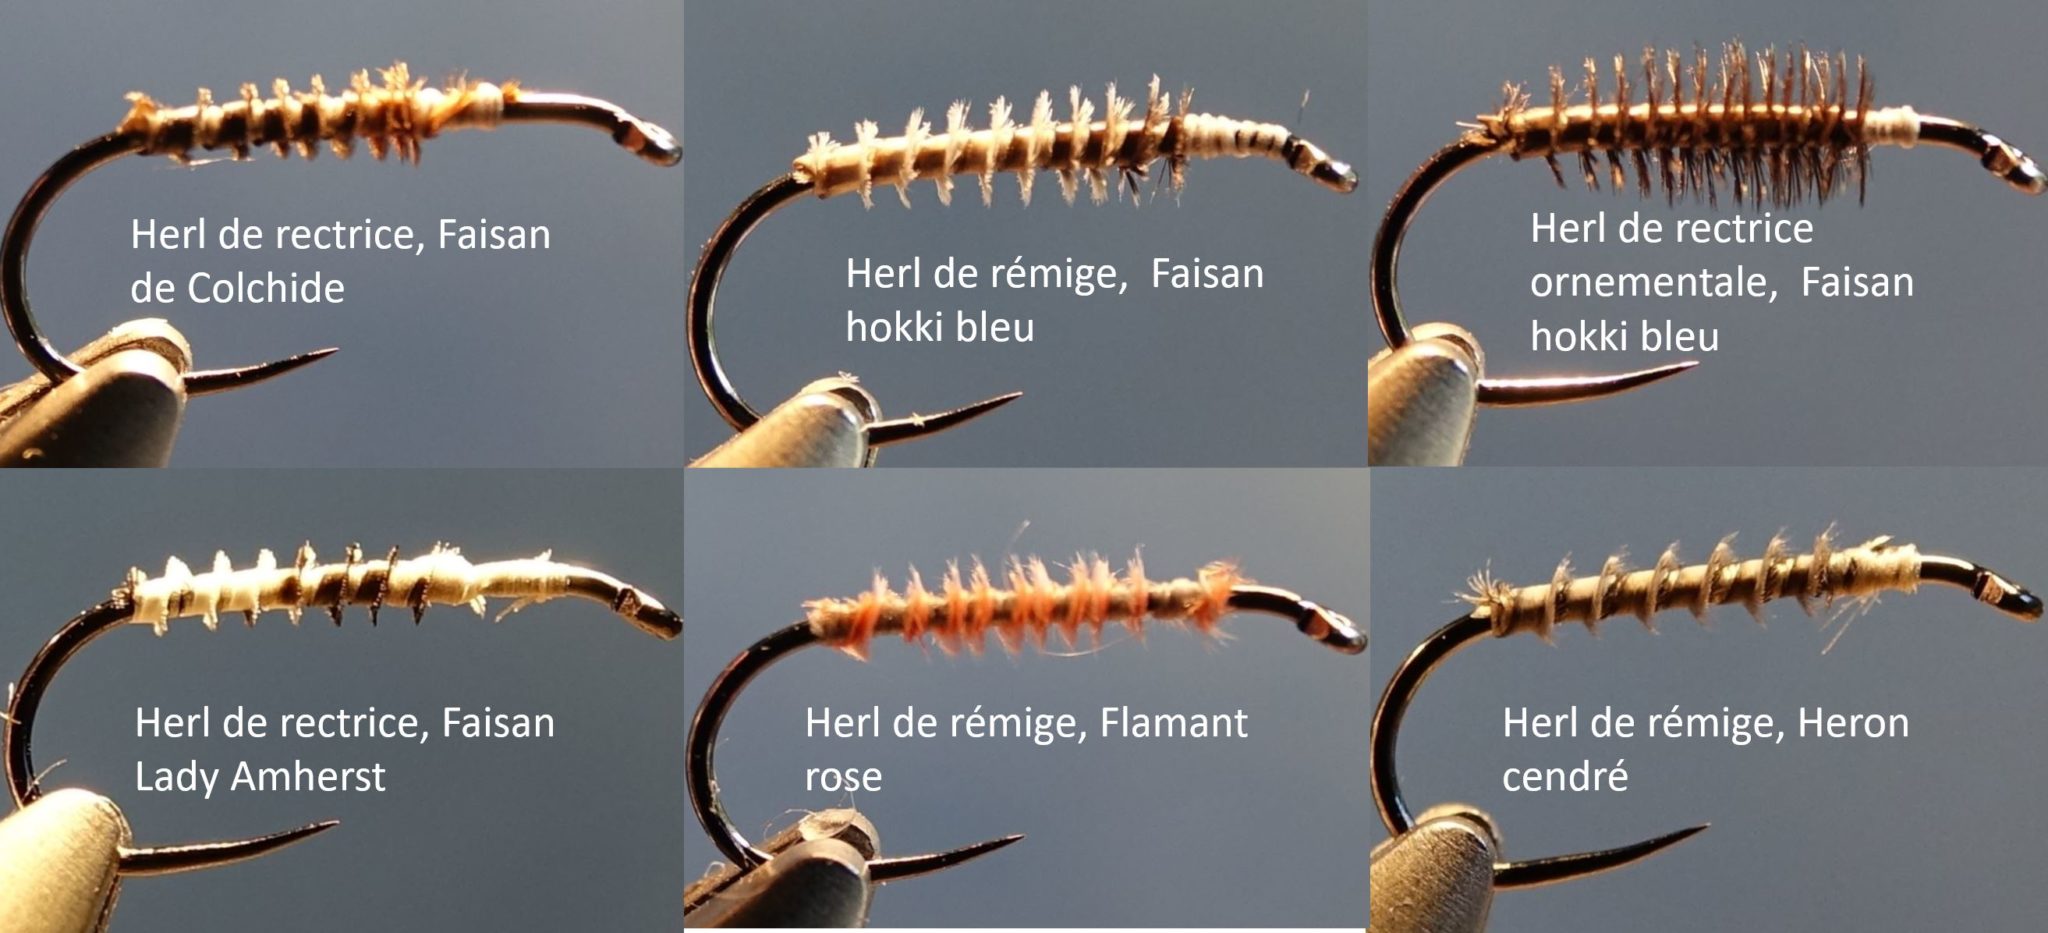 Herl faisan colchide hooki lady amherst flamant rose heron cendré mouche fly tying eclosion No.4